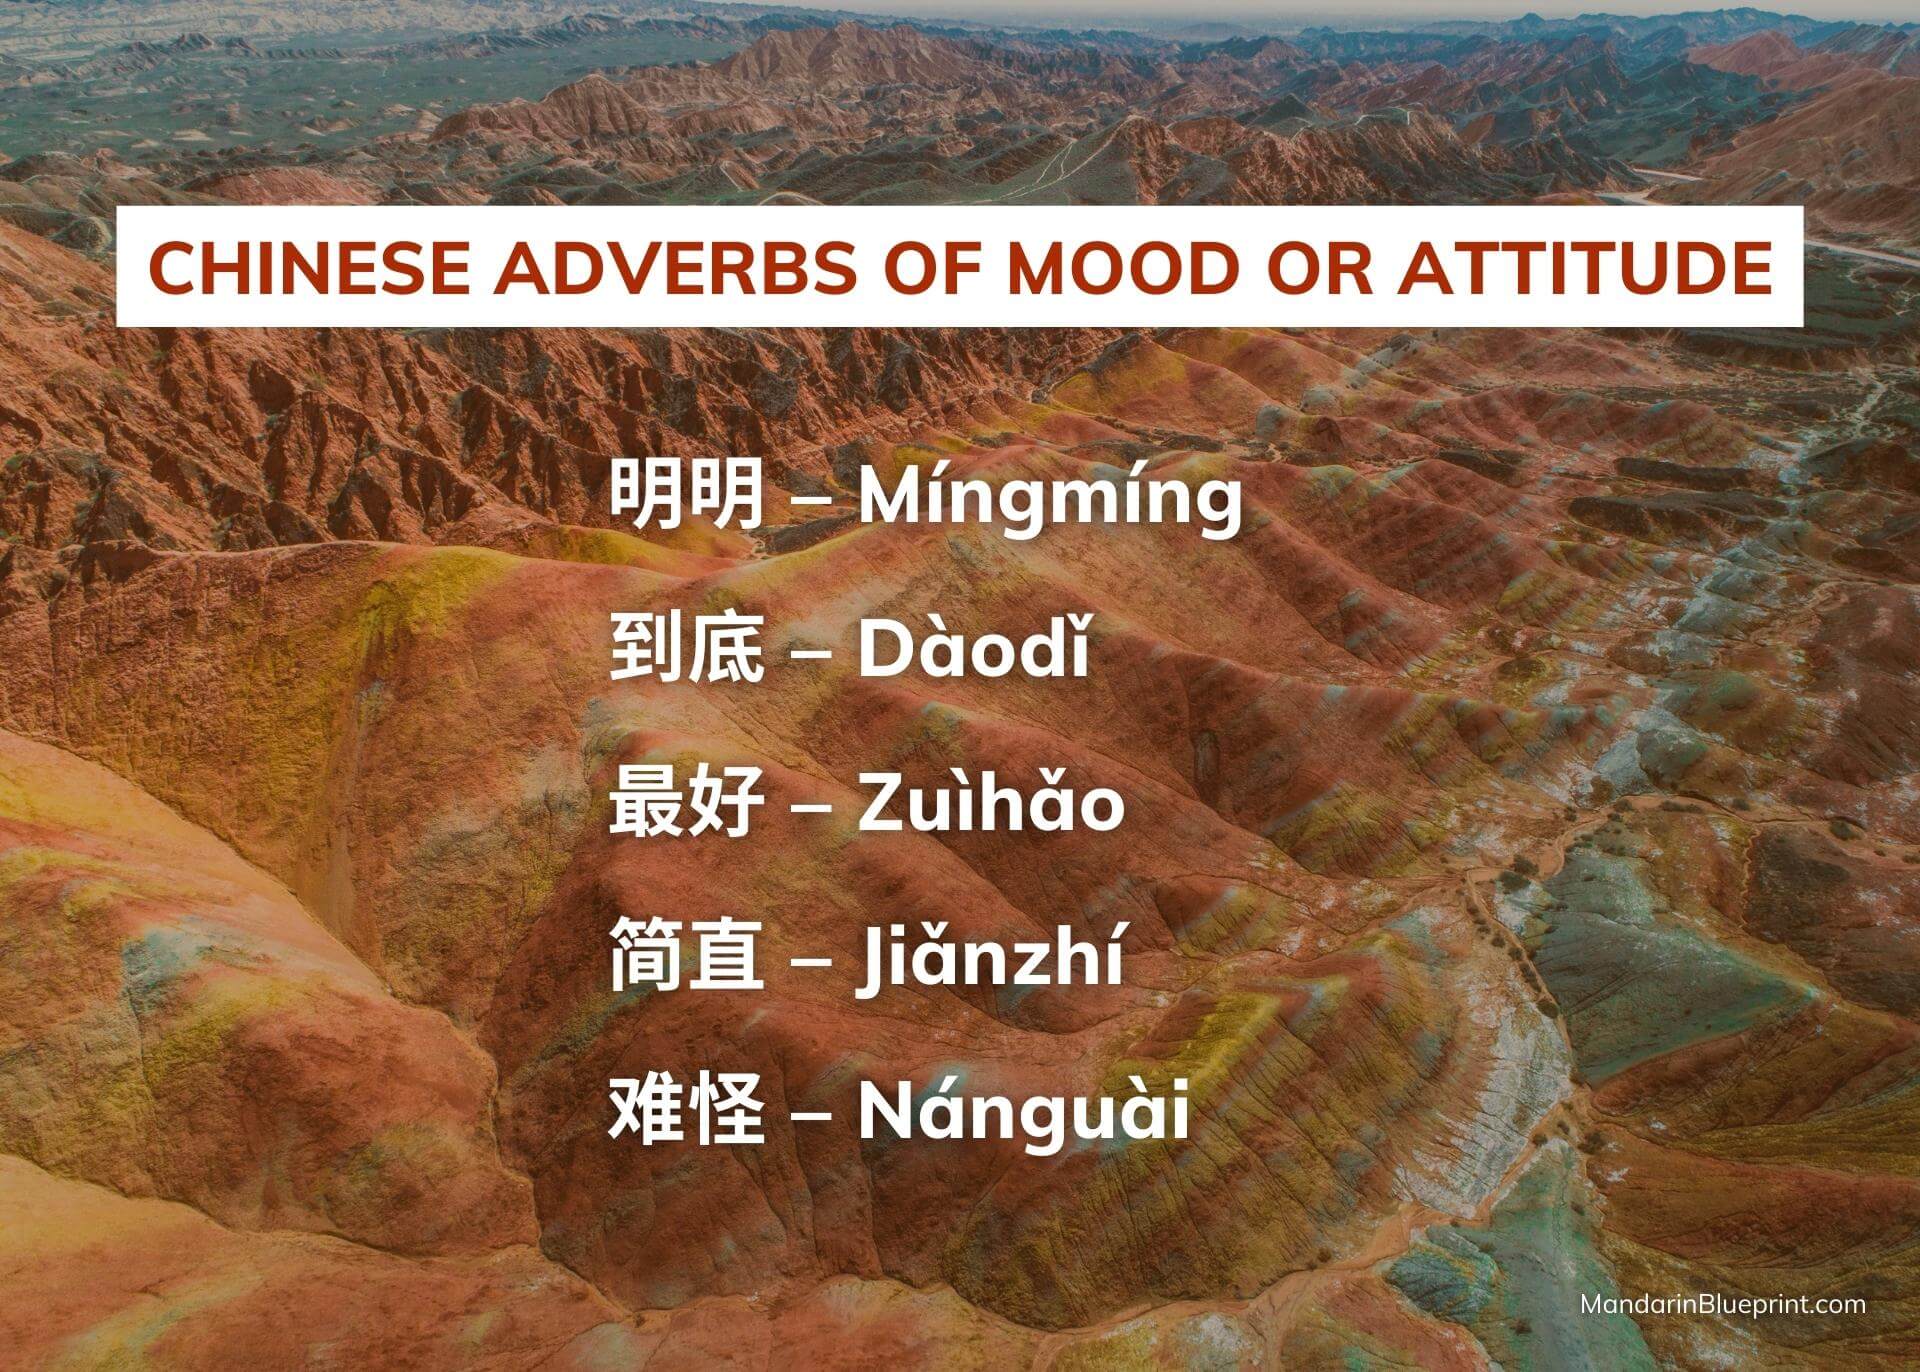 Chinese adverbs of mood or attitude